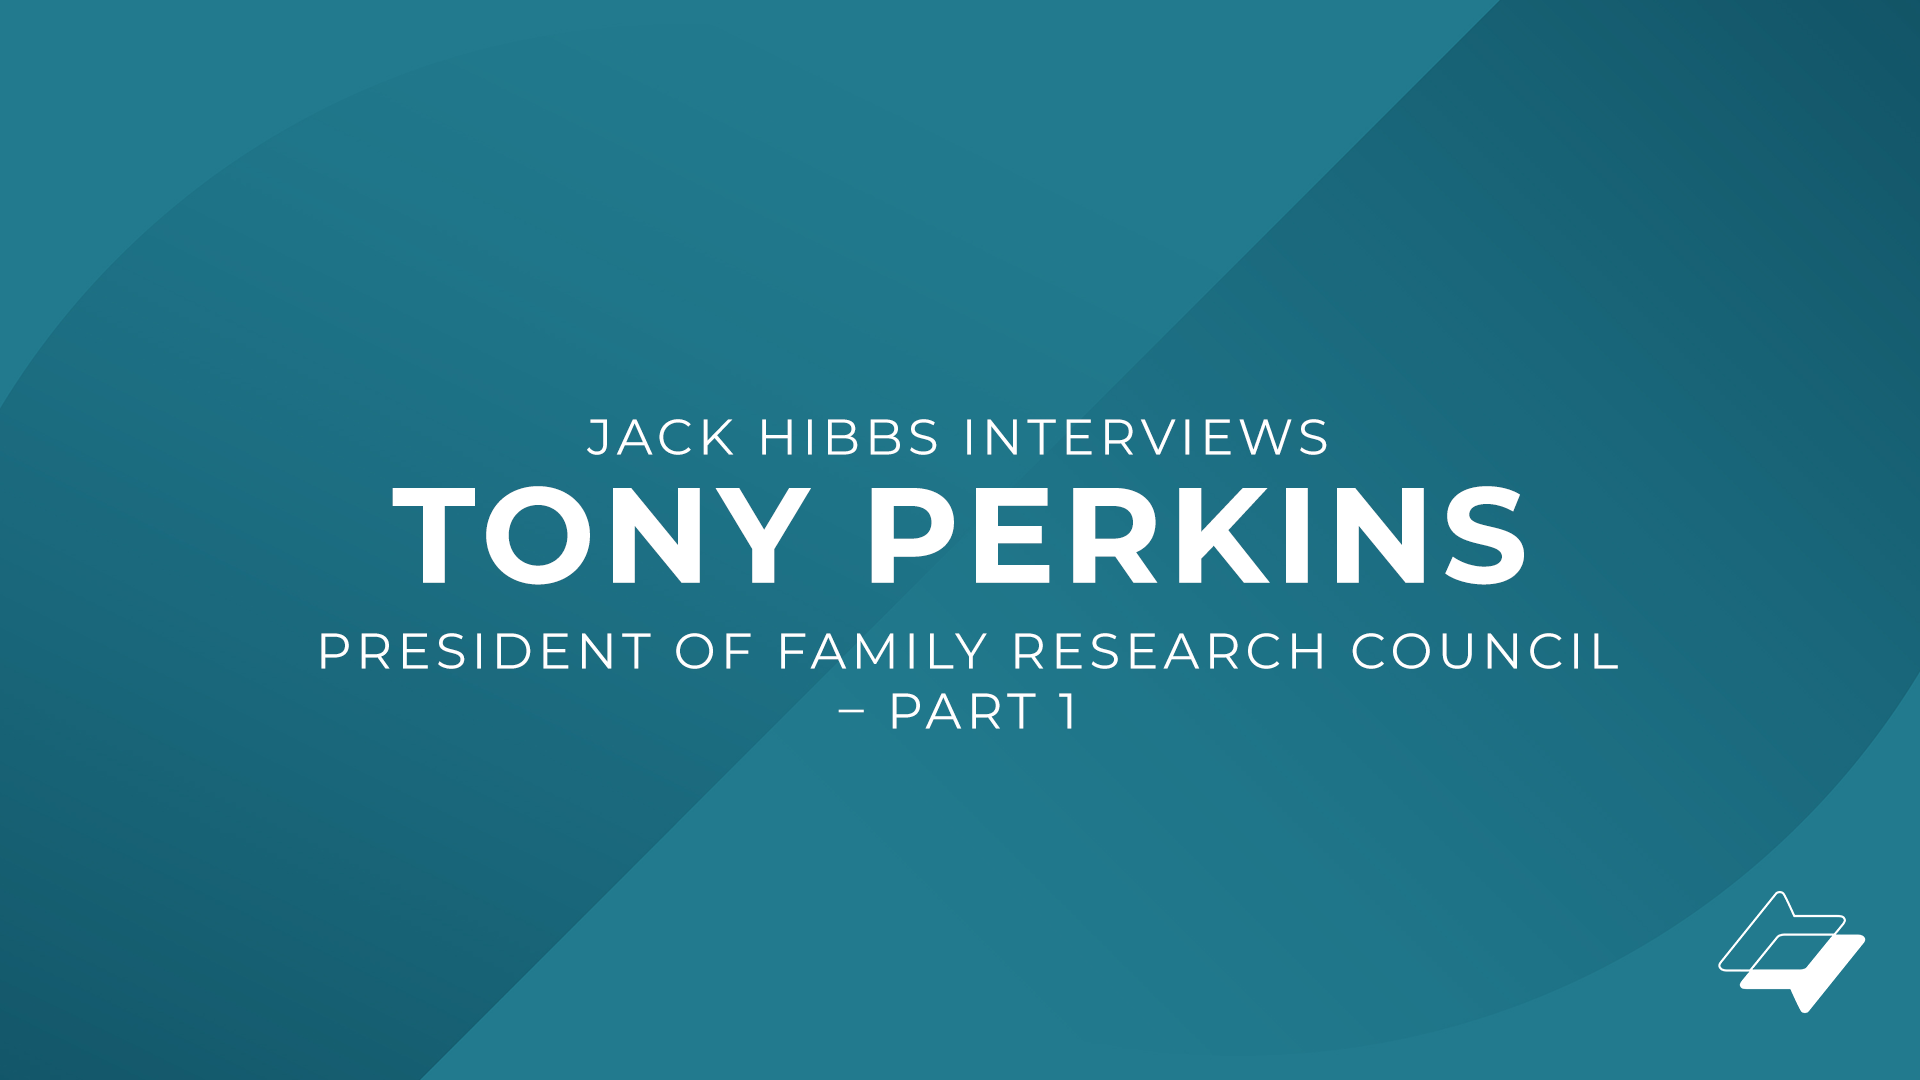 Jack Hibbs interviews Tony Perkins, President of Family Research Council – Part 1